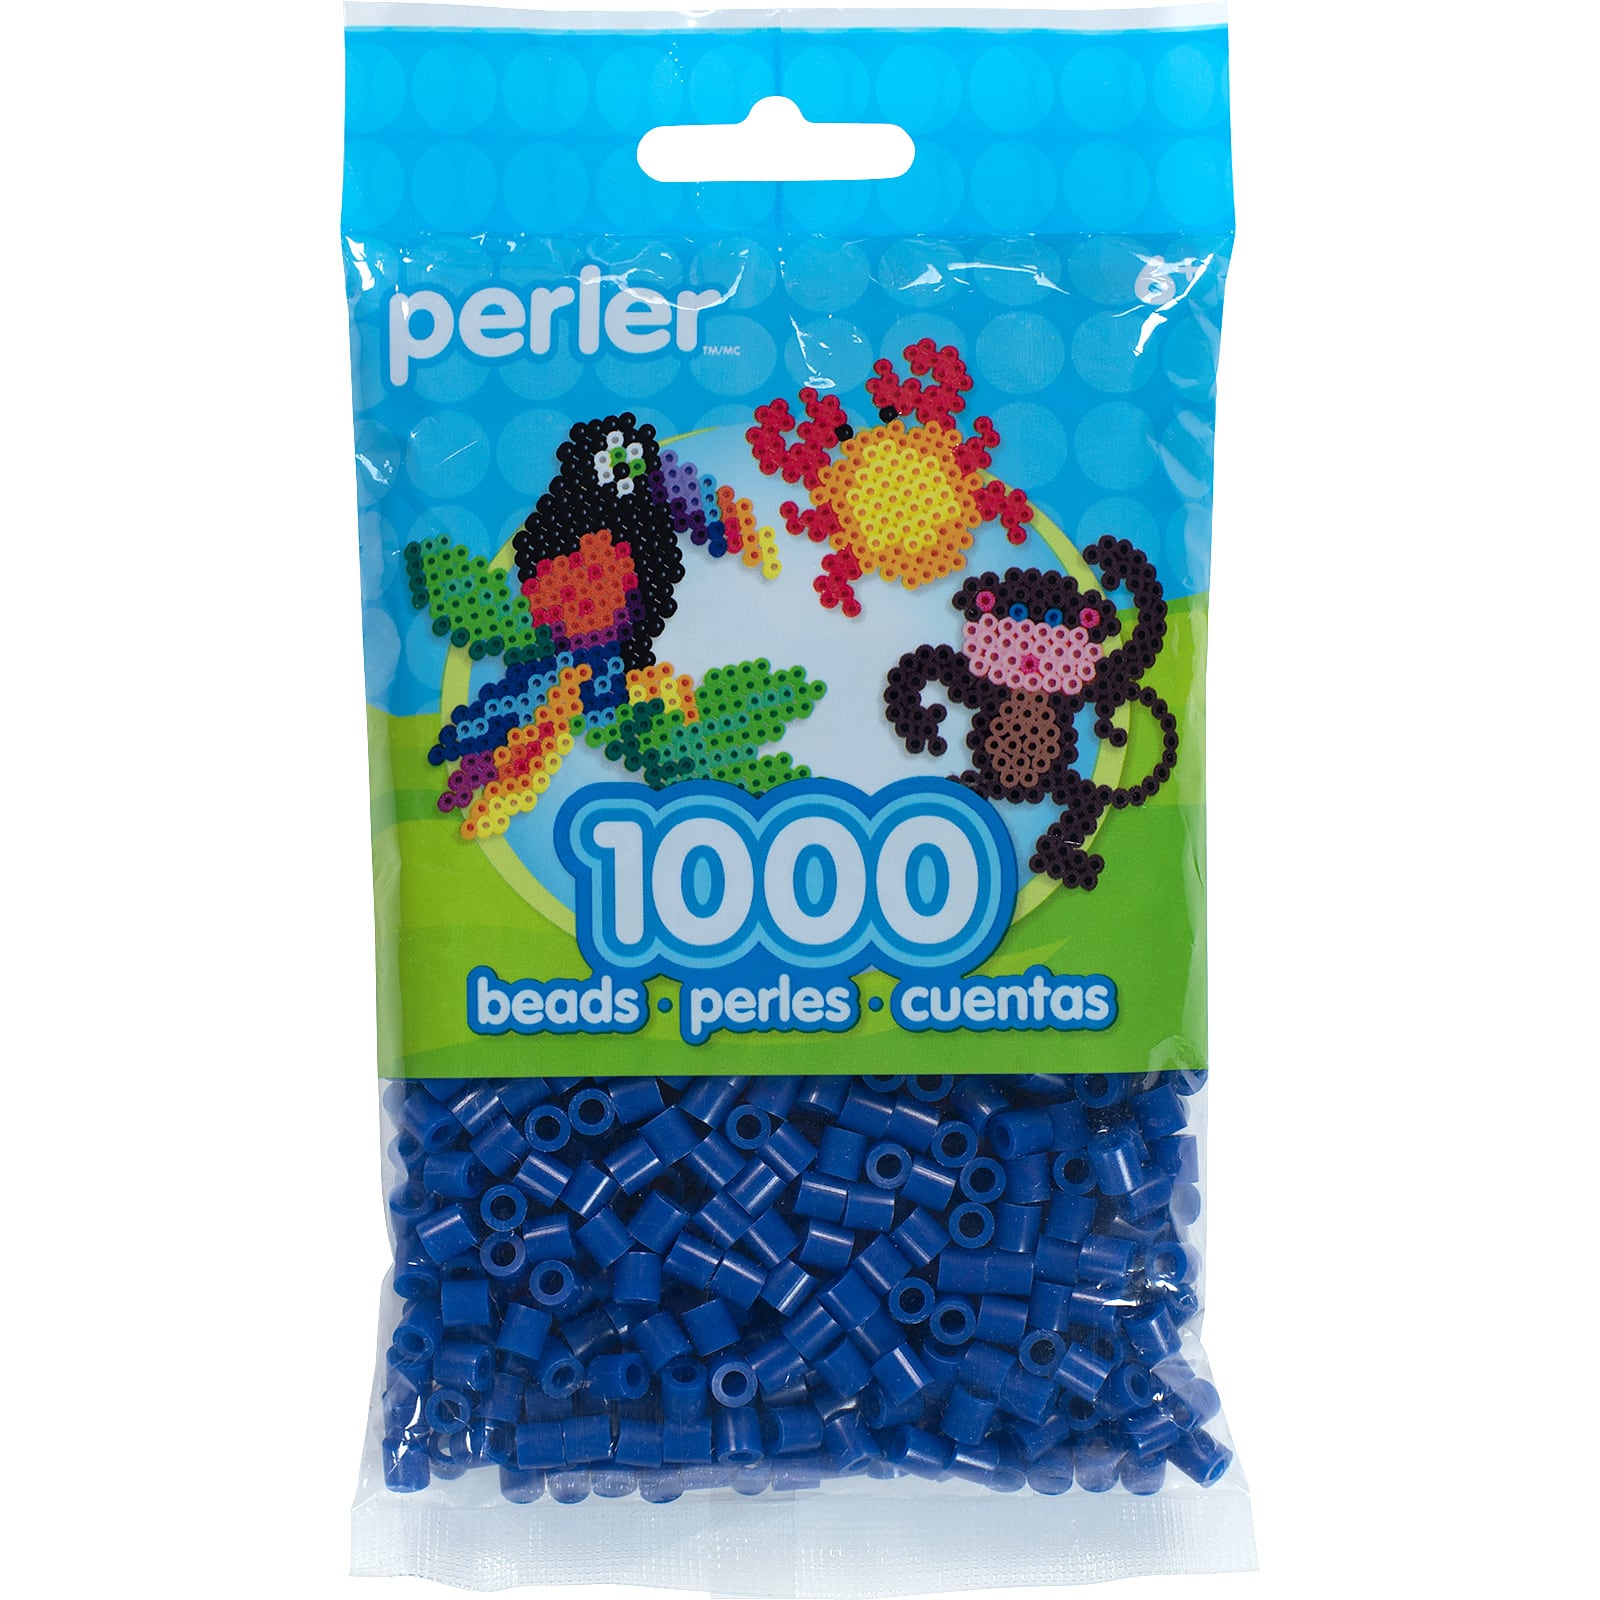 2,000 Black Fuse Beads 5 x 5mm Bulk Pack of Fusion Beads Works with Perler  Beads